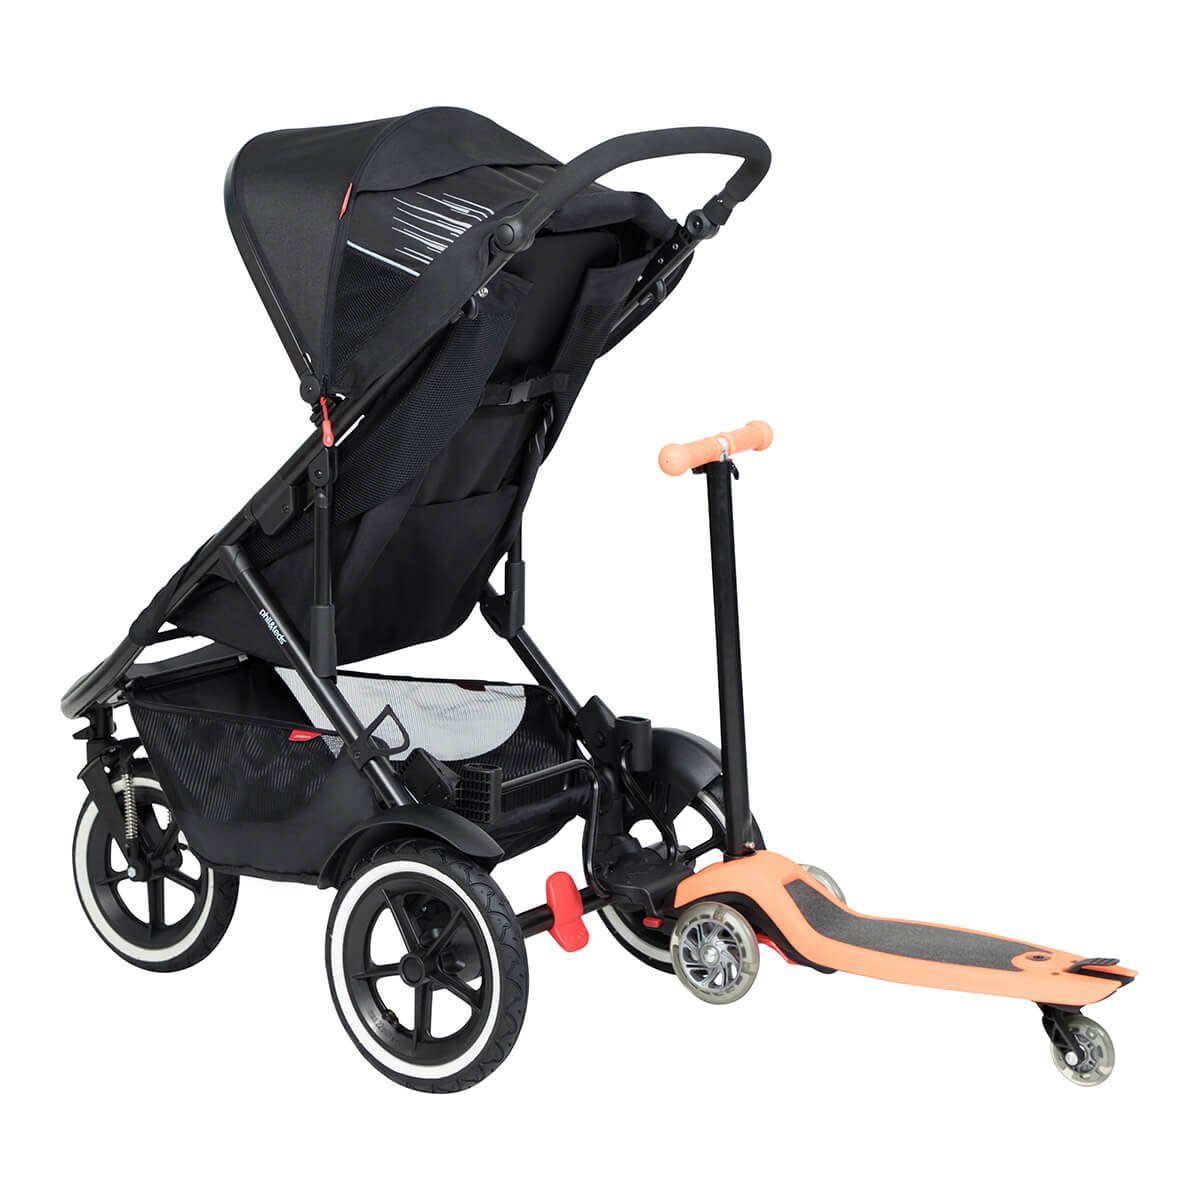 https://cdn.accentuate.io/4417284964386/19437753860274/philteds-sport-buggy-with-freerider-stroller-board-in-rear-v1626482792166.jpg?1200x1200